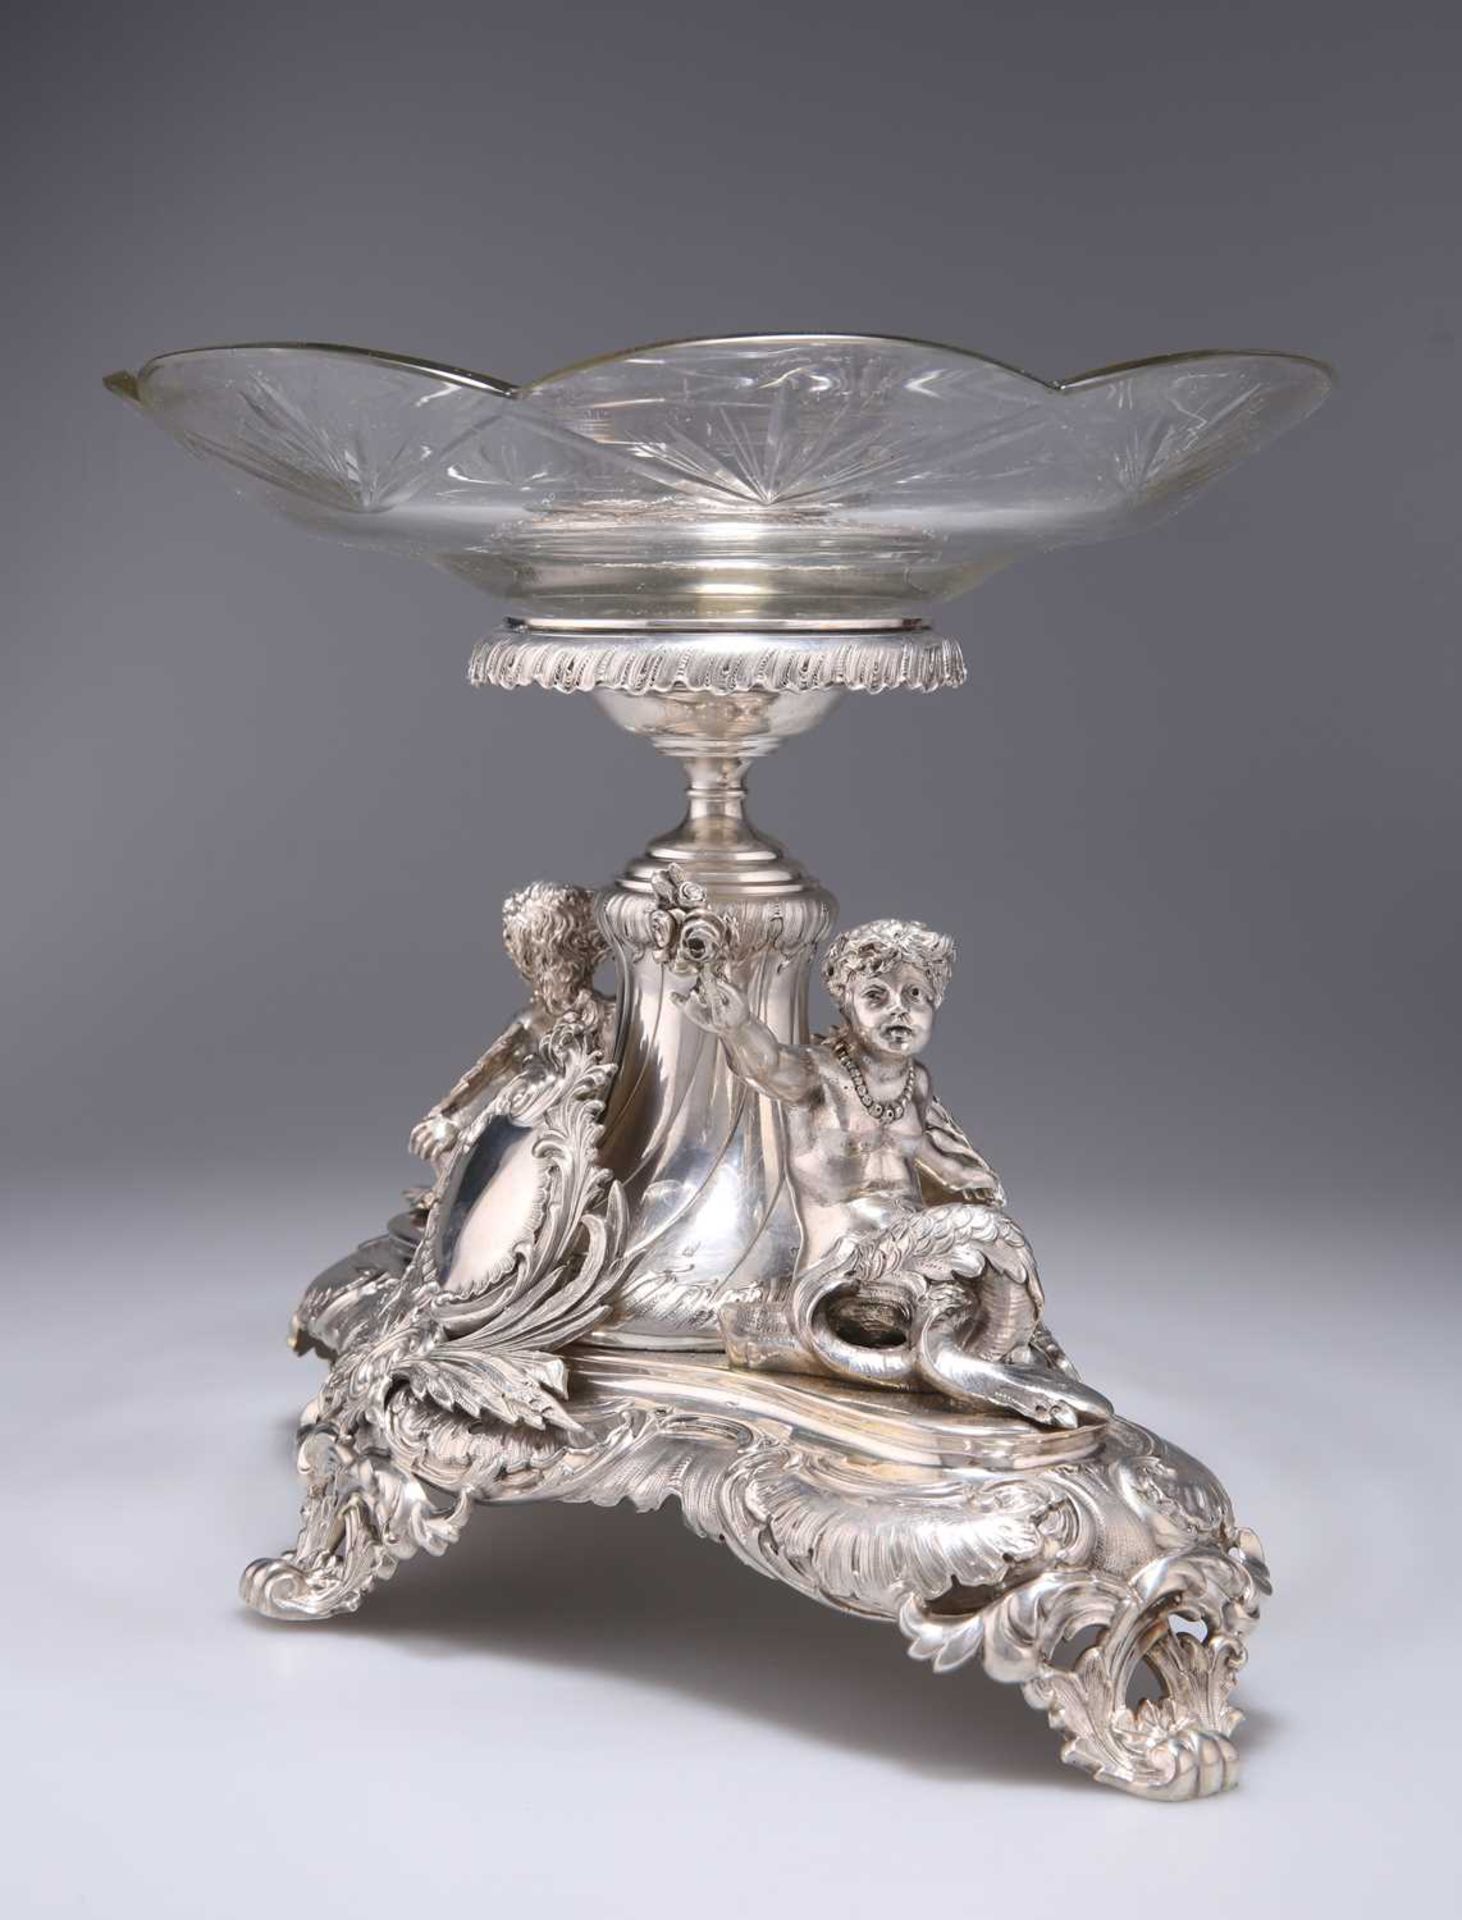 A VIENNESE SILVER CENTREPIECE, OF FINE QUALITY - Image 3 of 3